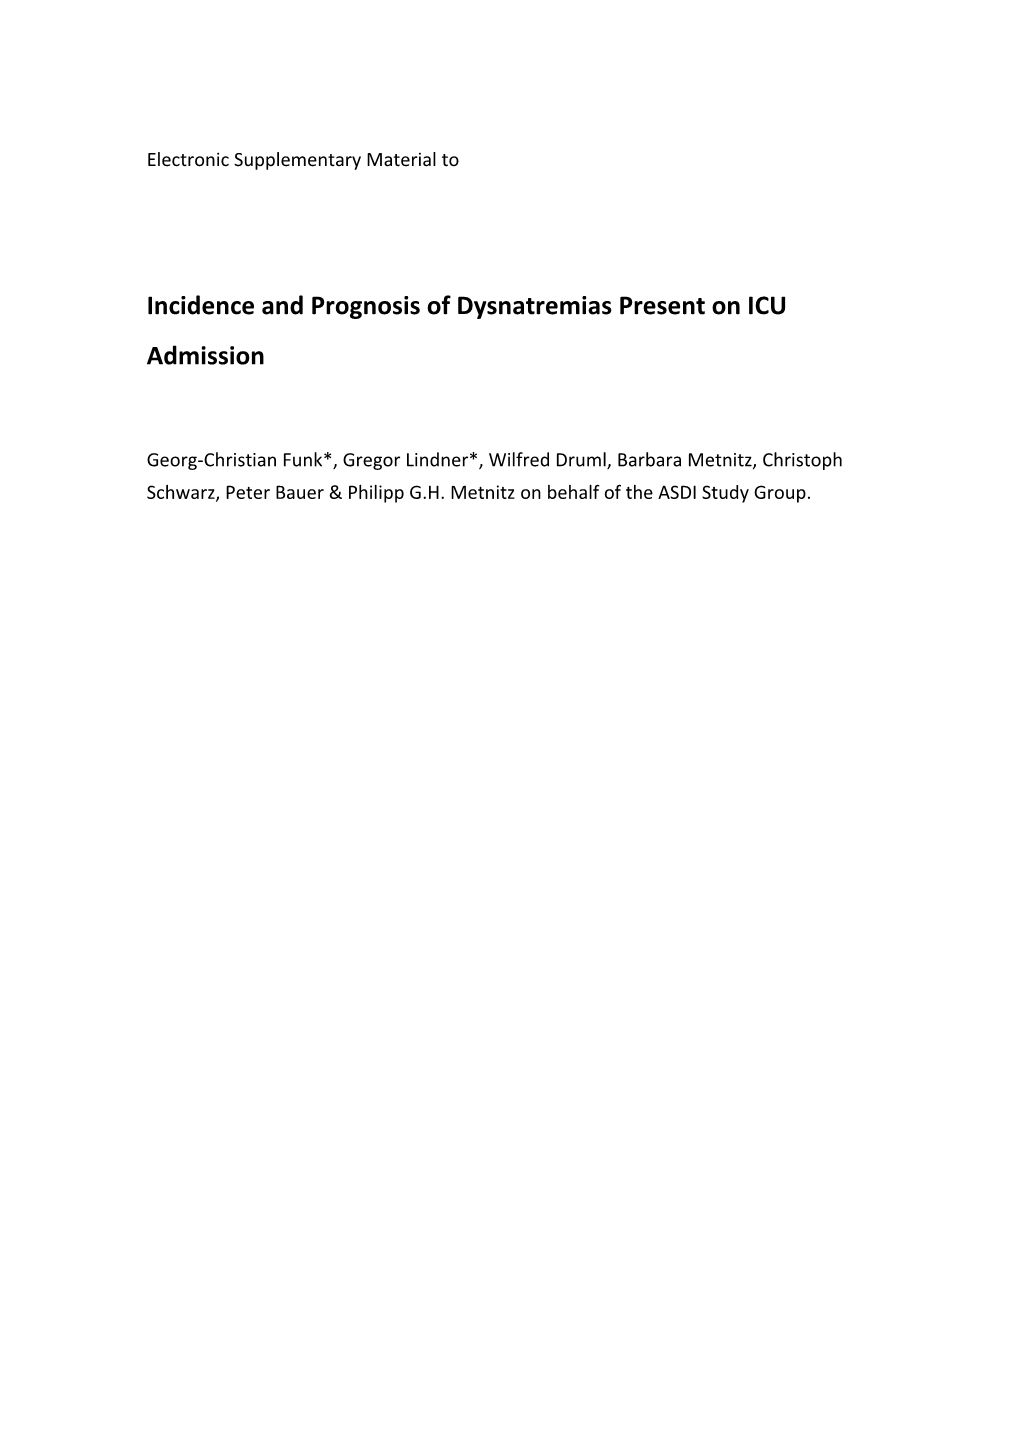 Incidence and Prognosis of Dysnatremias Present on ICU Admission